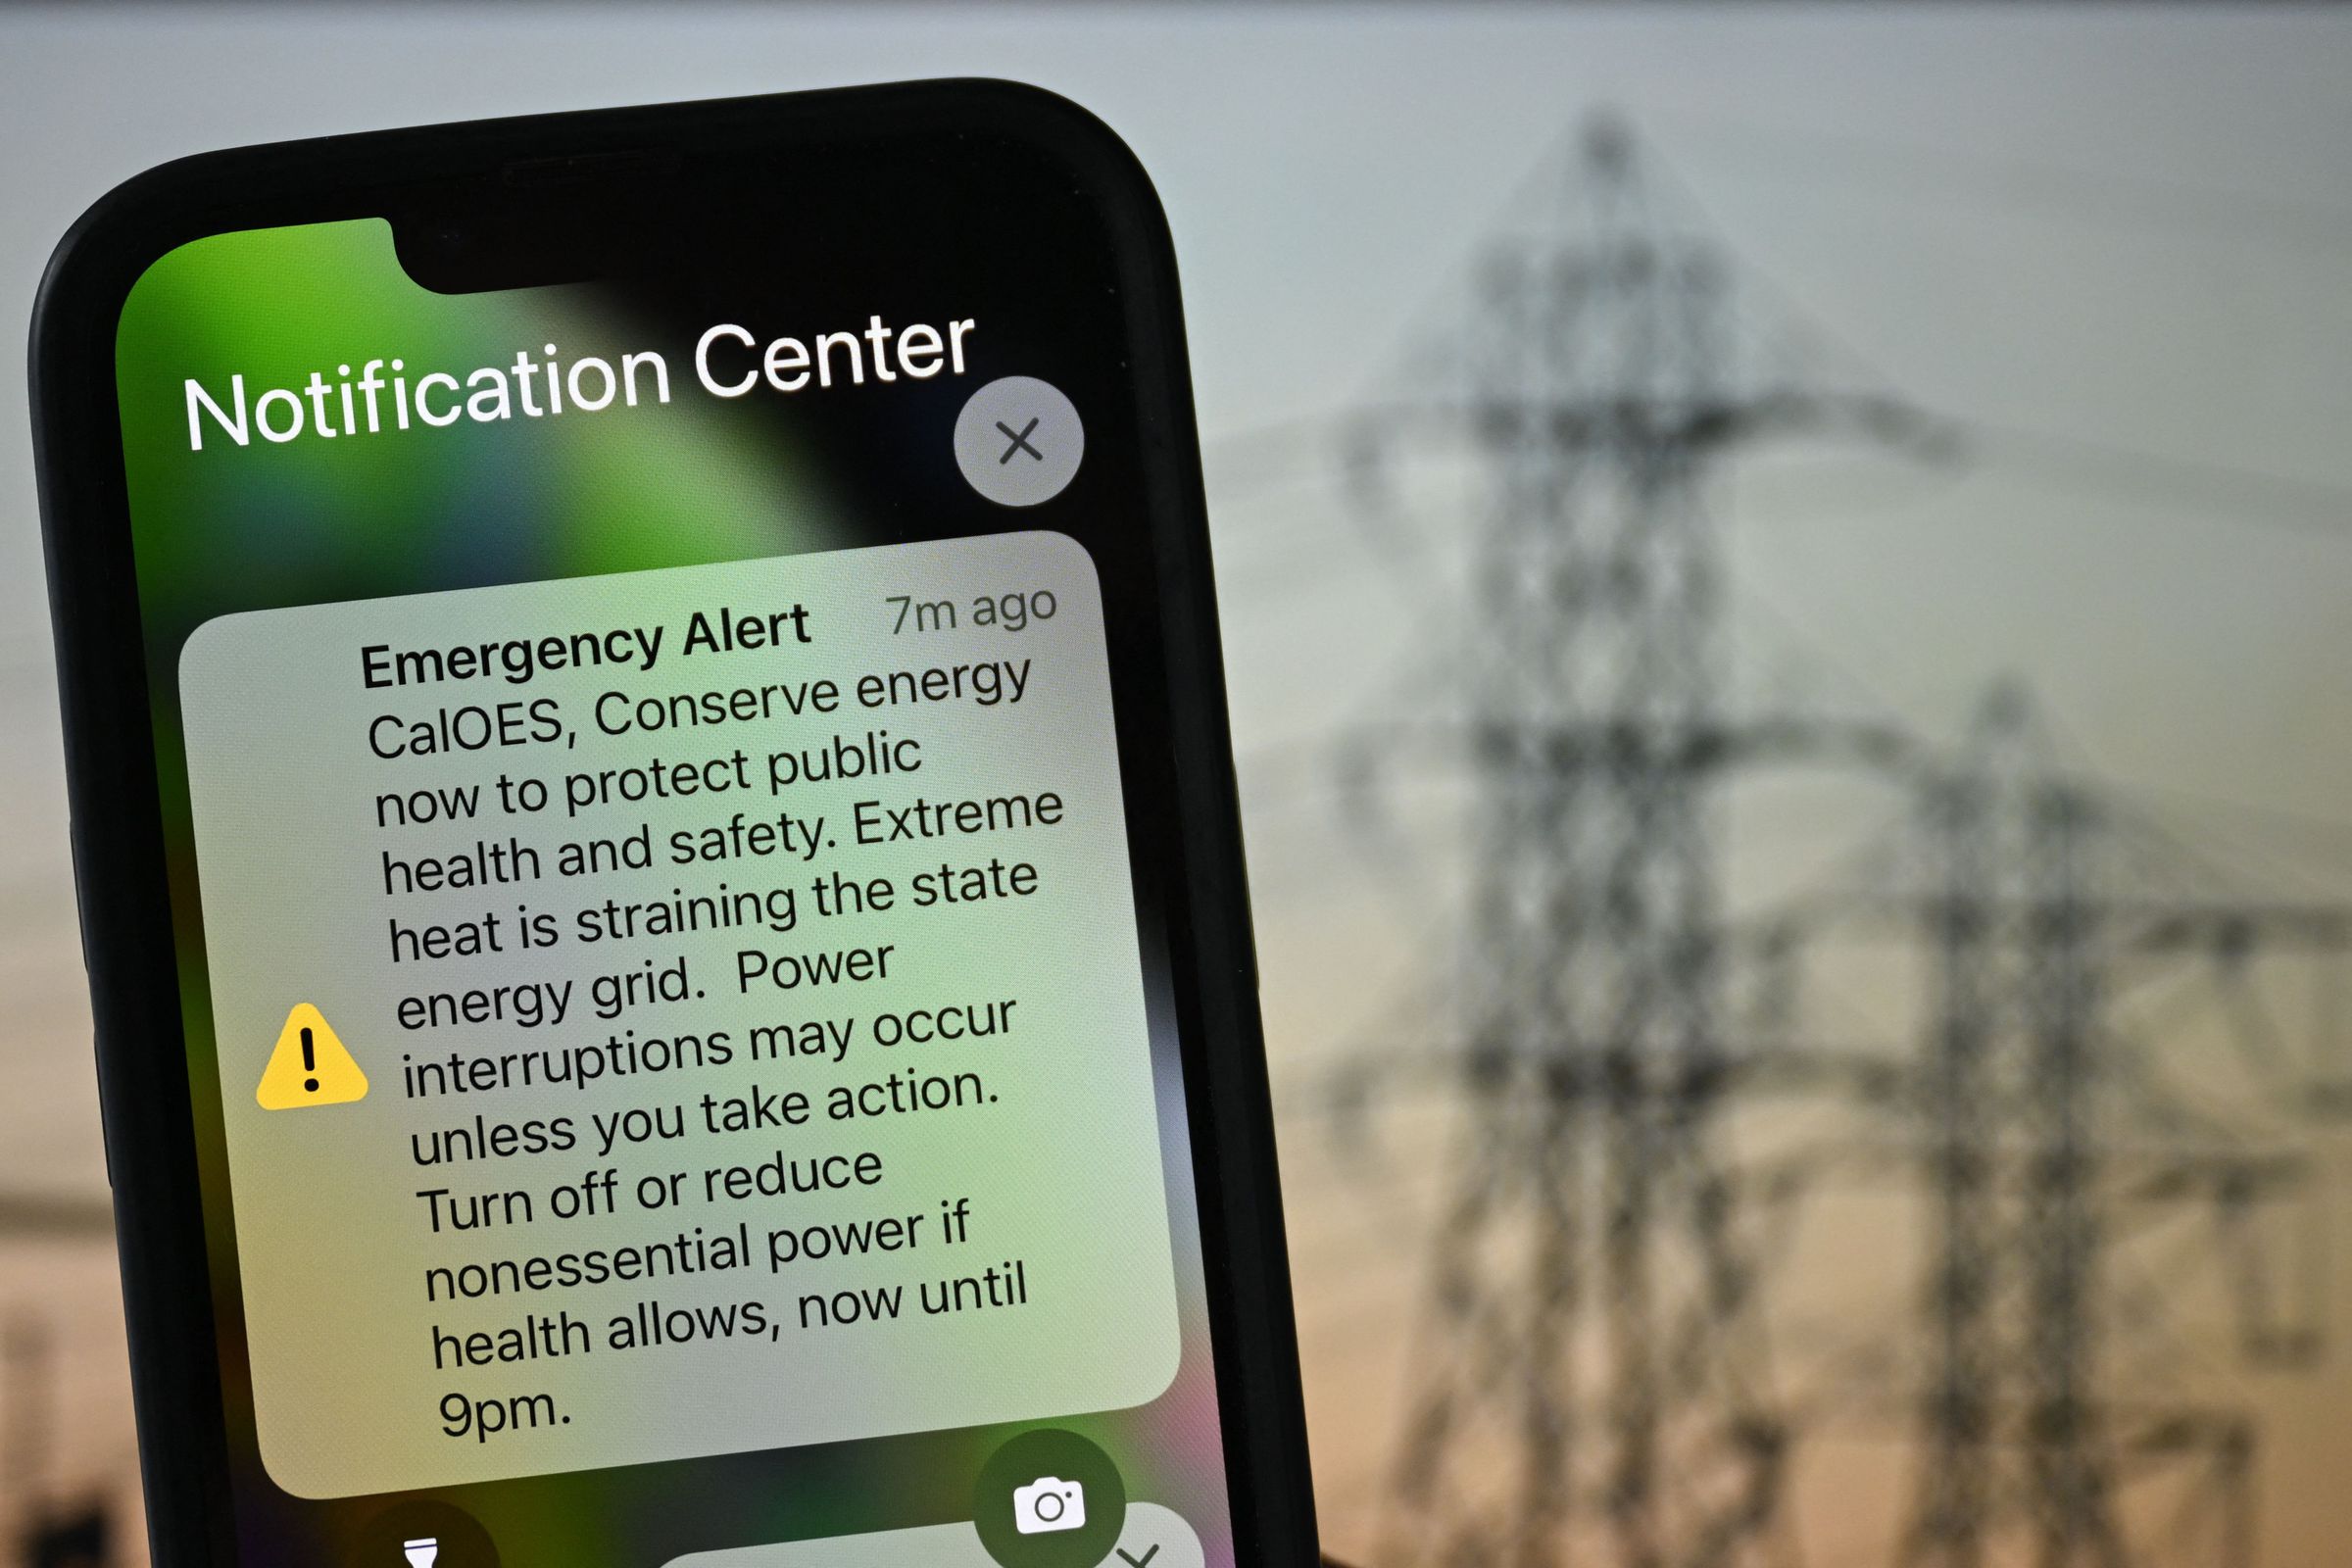 iPhone alert screen showing an emergency alert to conserve energy in California, against the backdrop of power lines.